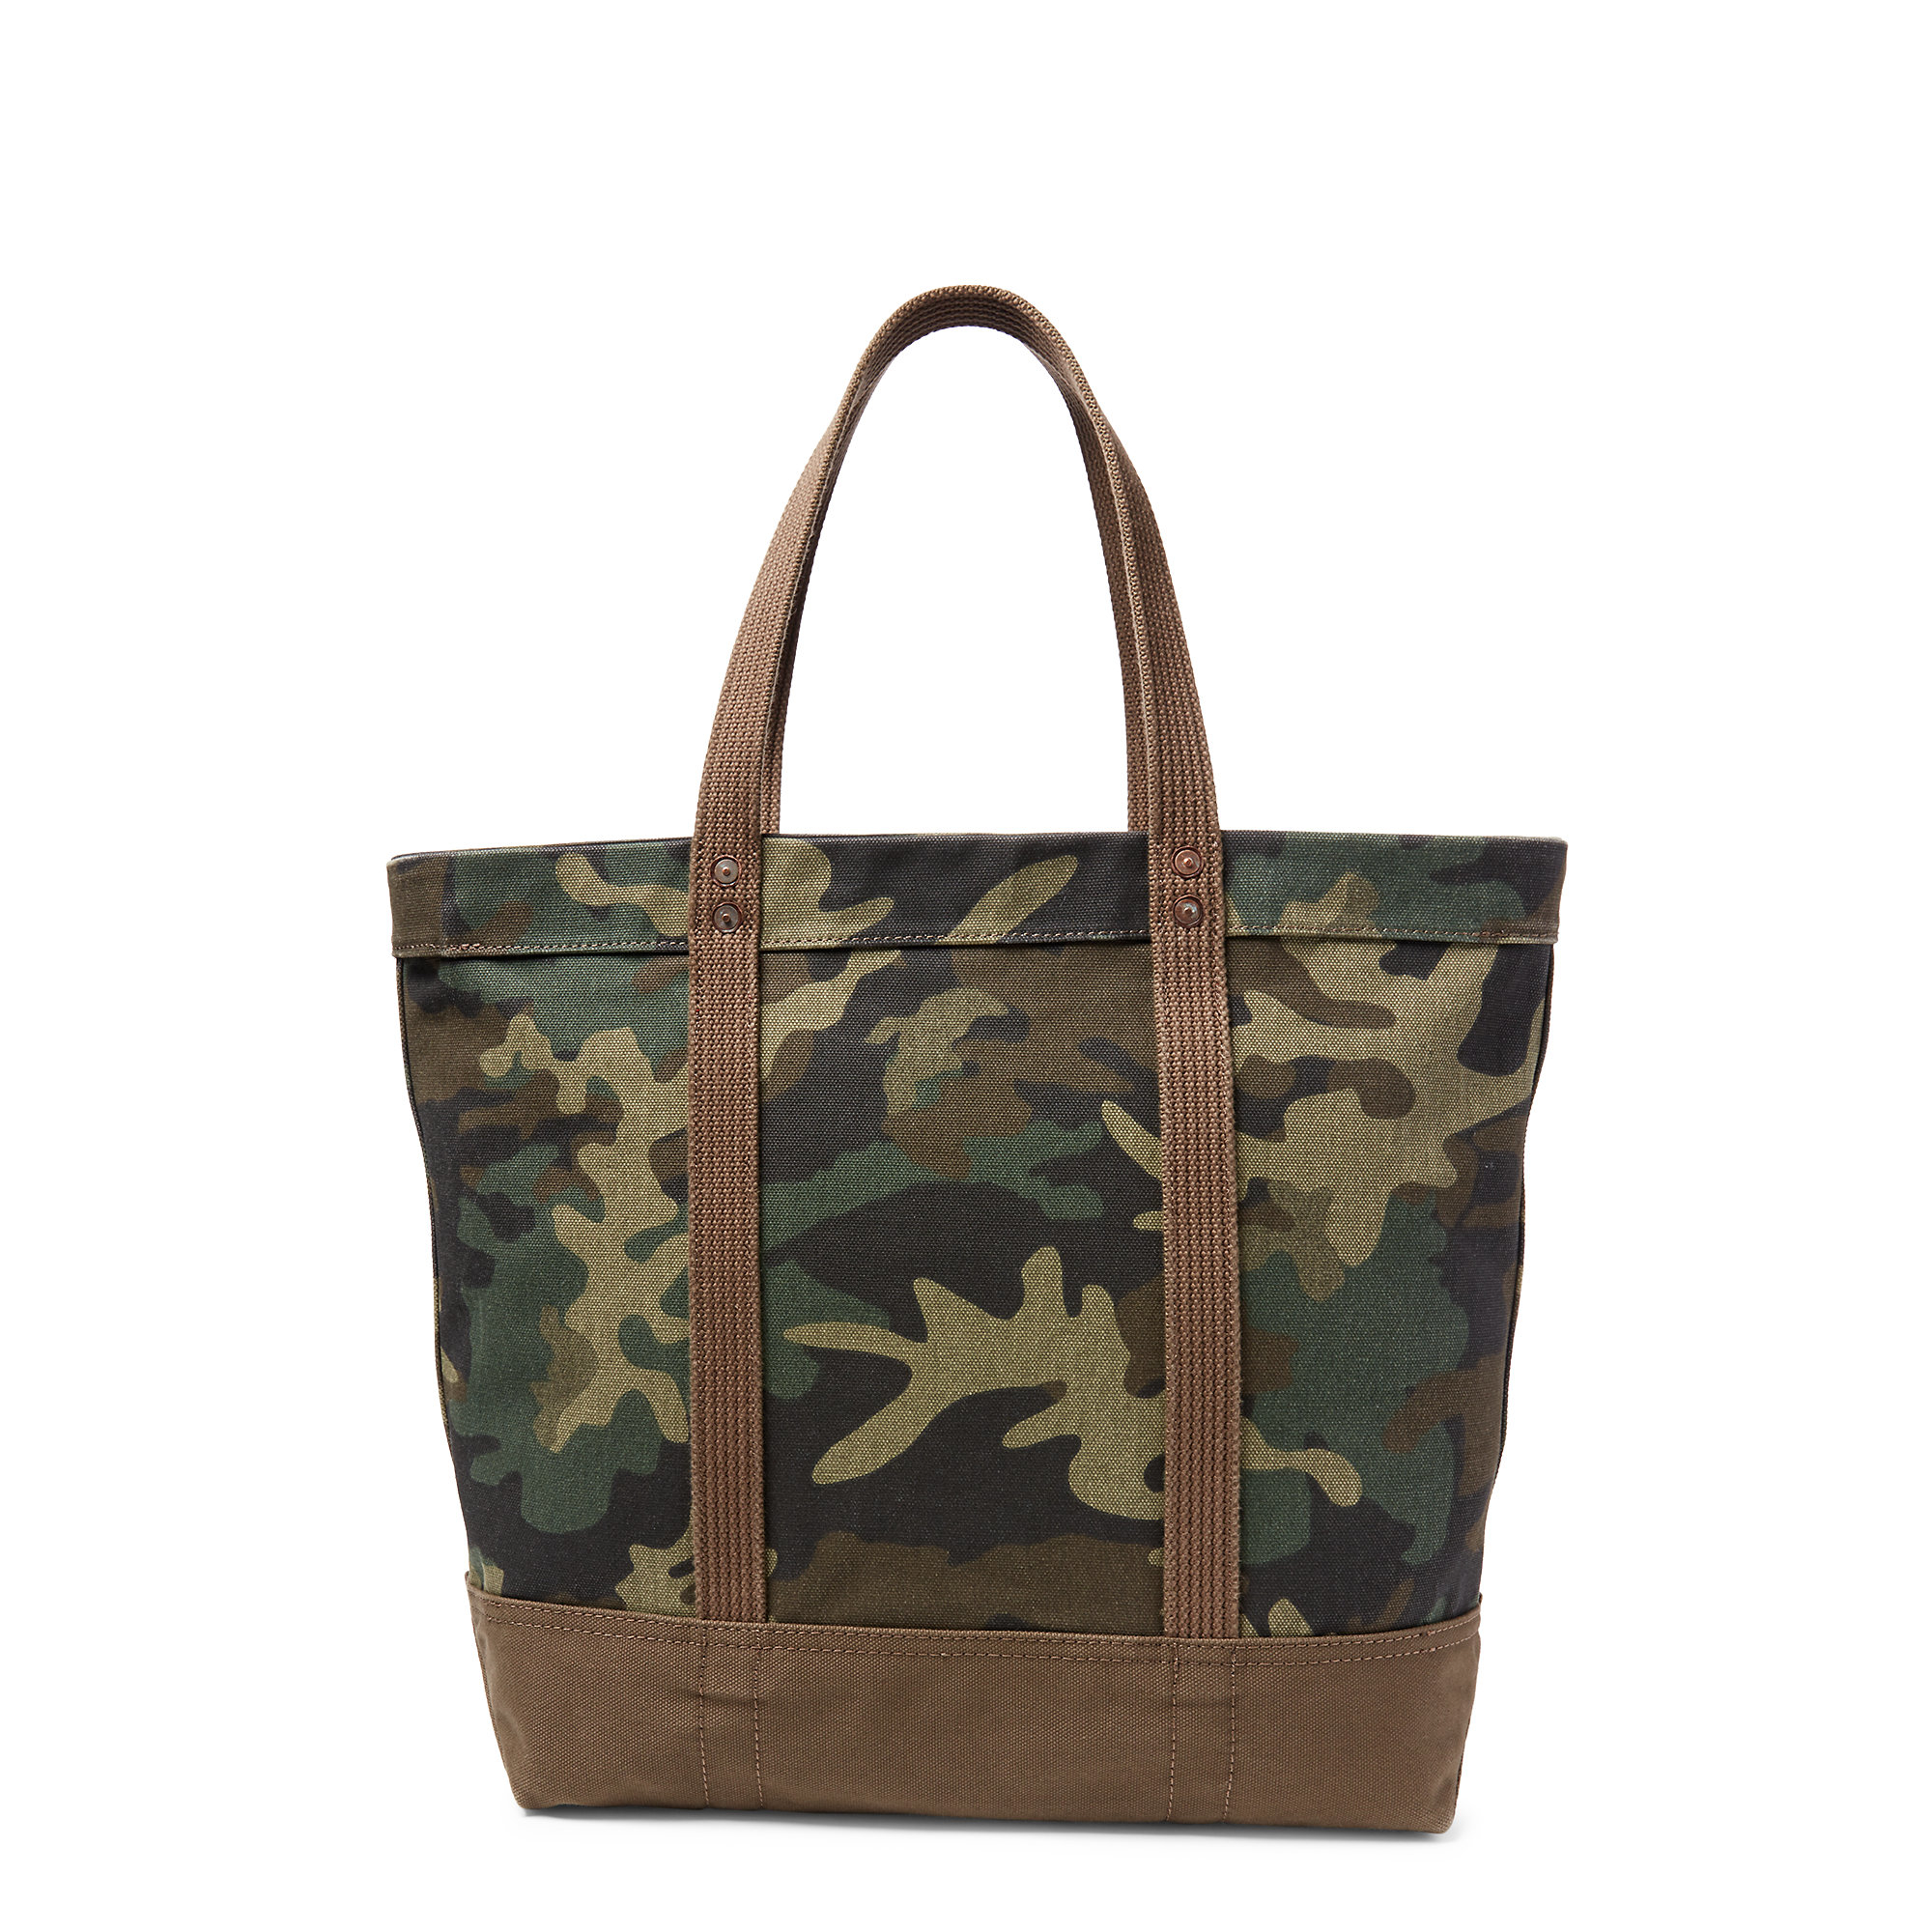 Lyst - Polo Ralph Lauren Big Pony Camouflage Tote in Green